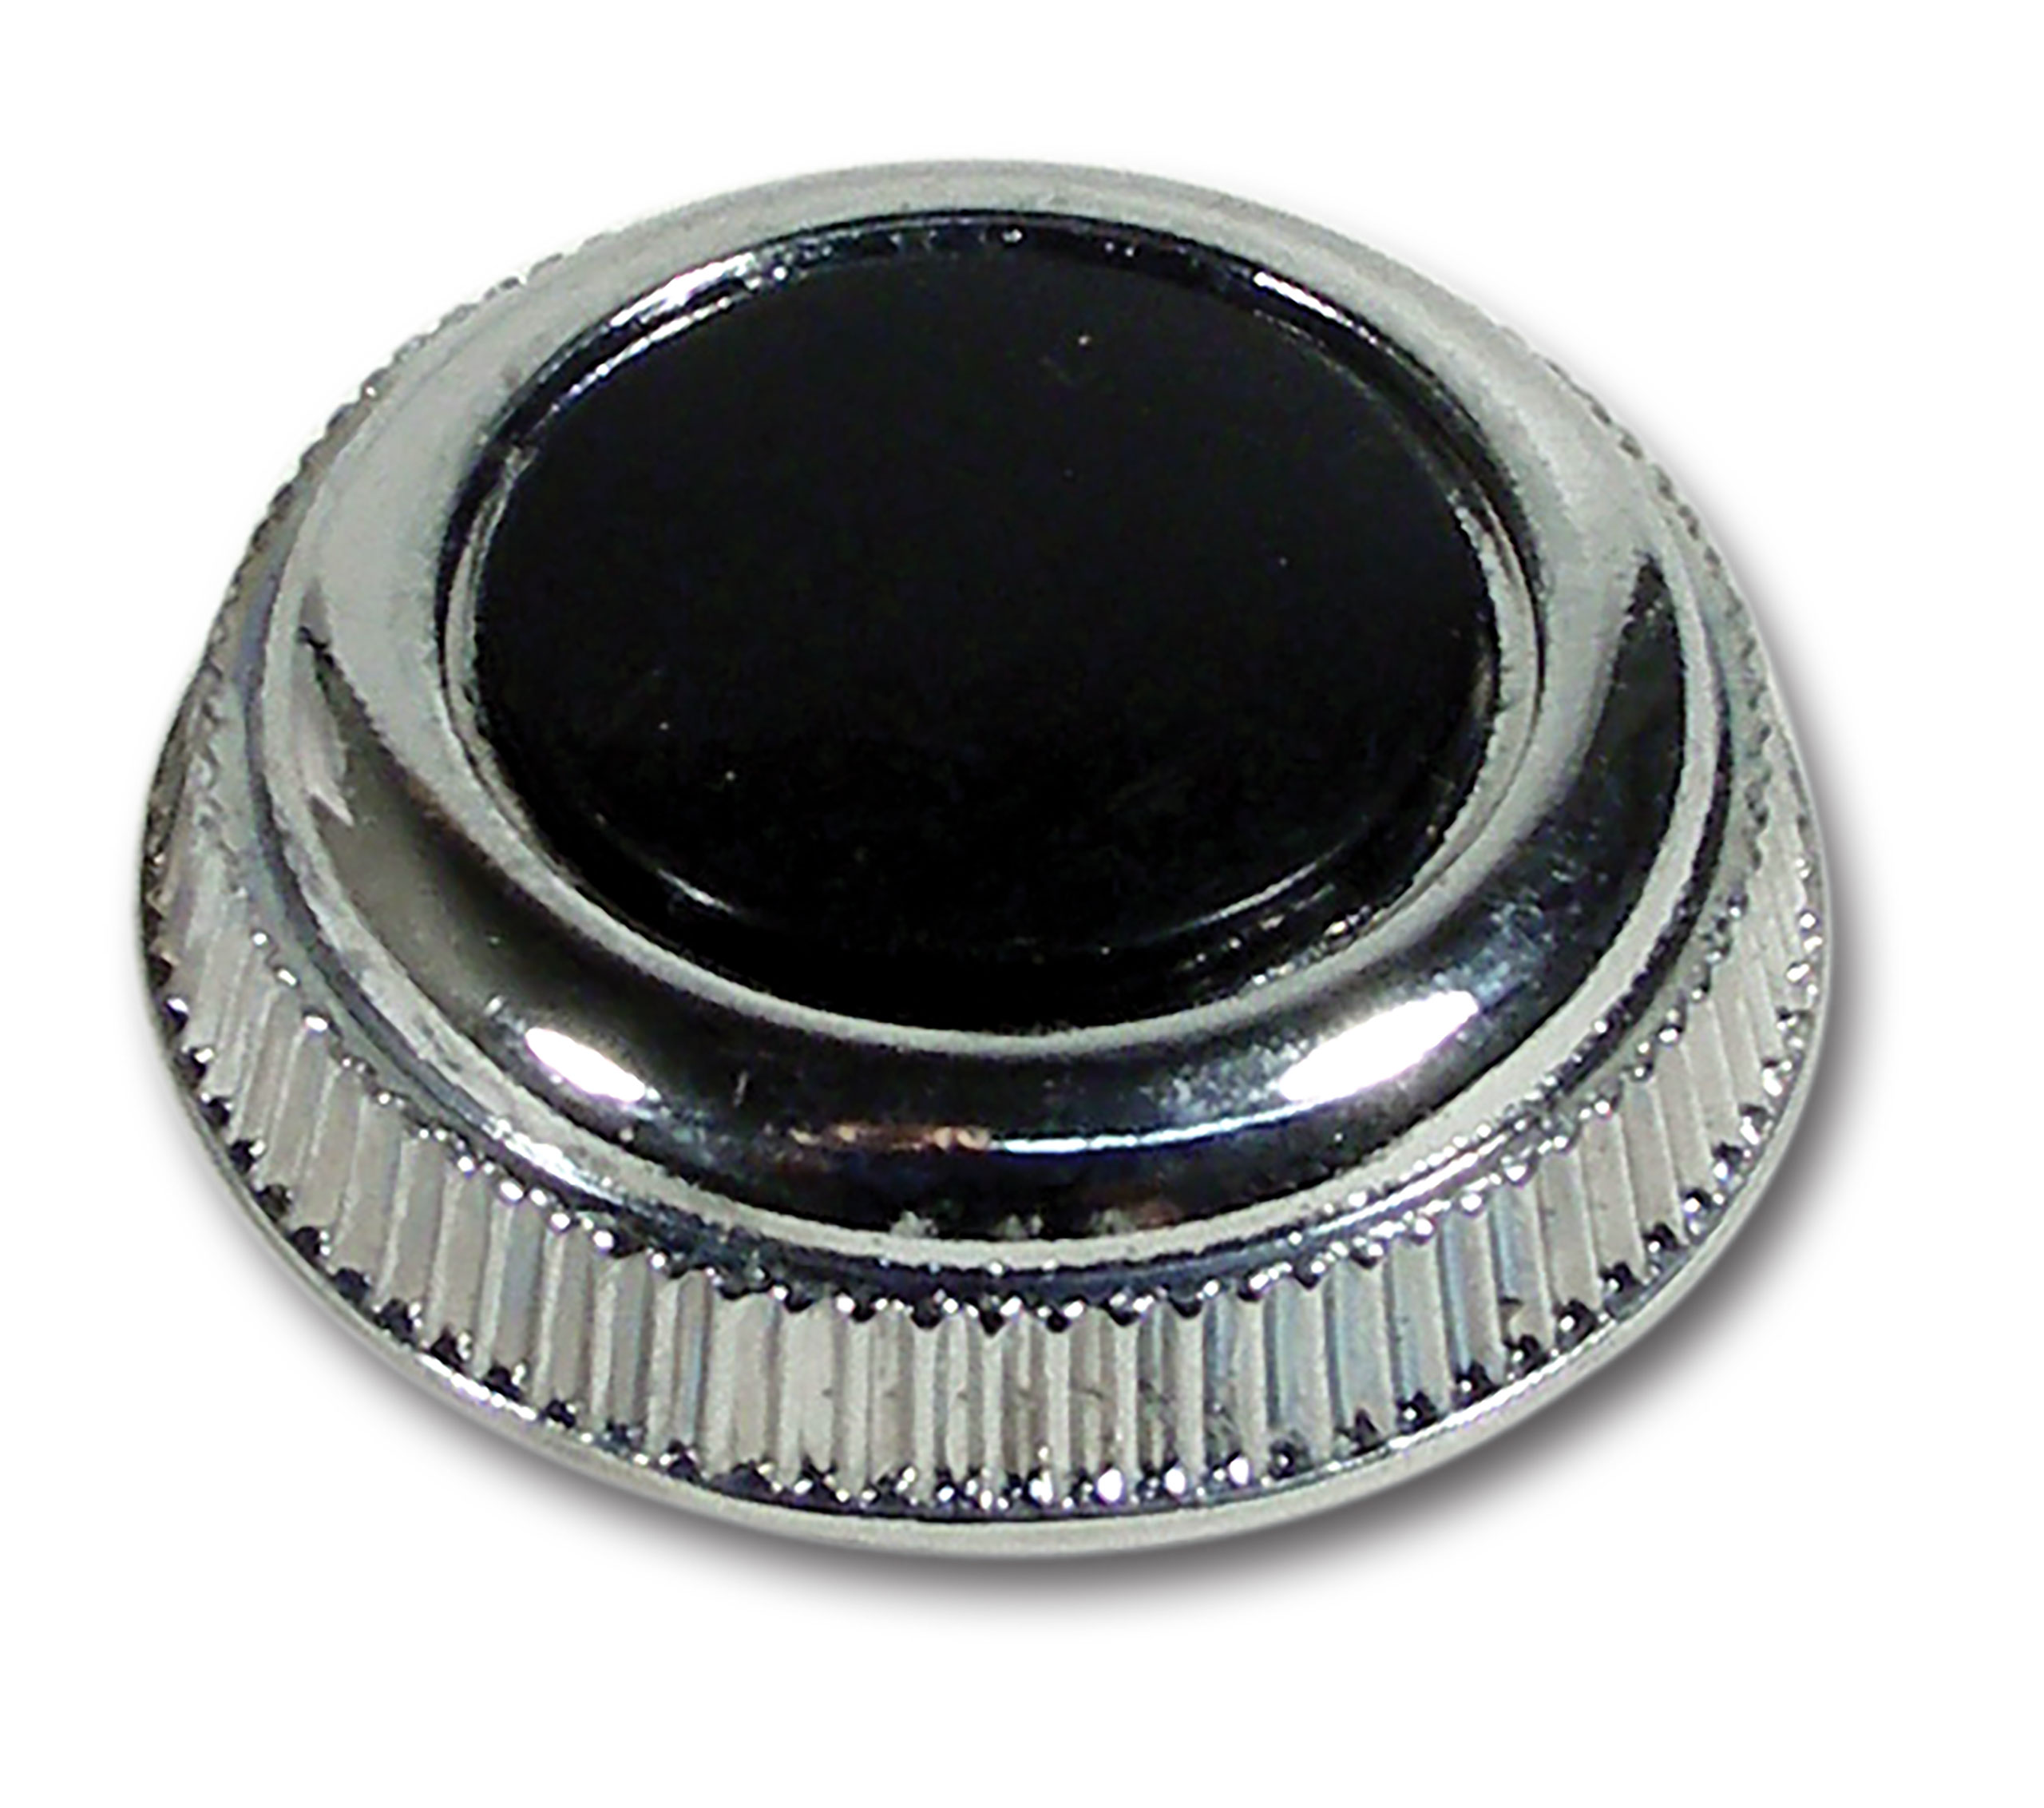 C2 1967 Chevrolet Corvette Heater Knob. Defroster/Air Conditioning (Screw On Type) - Auto Accessories of America